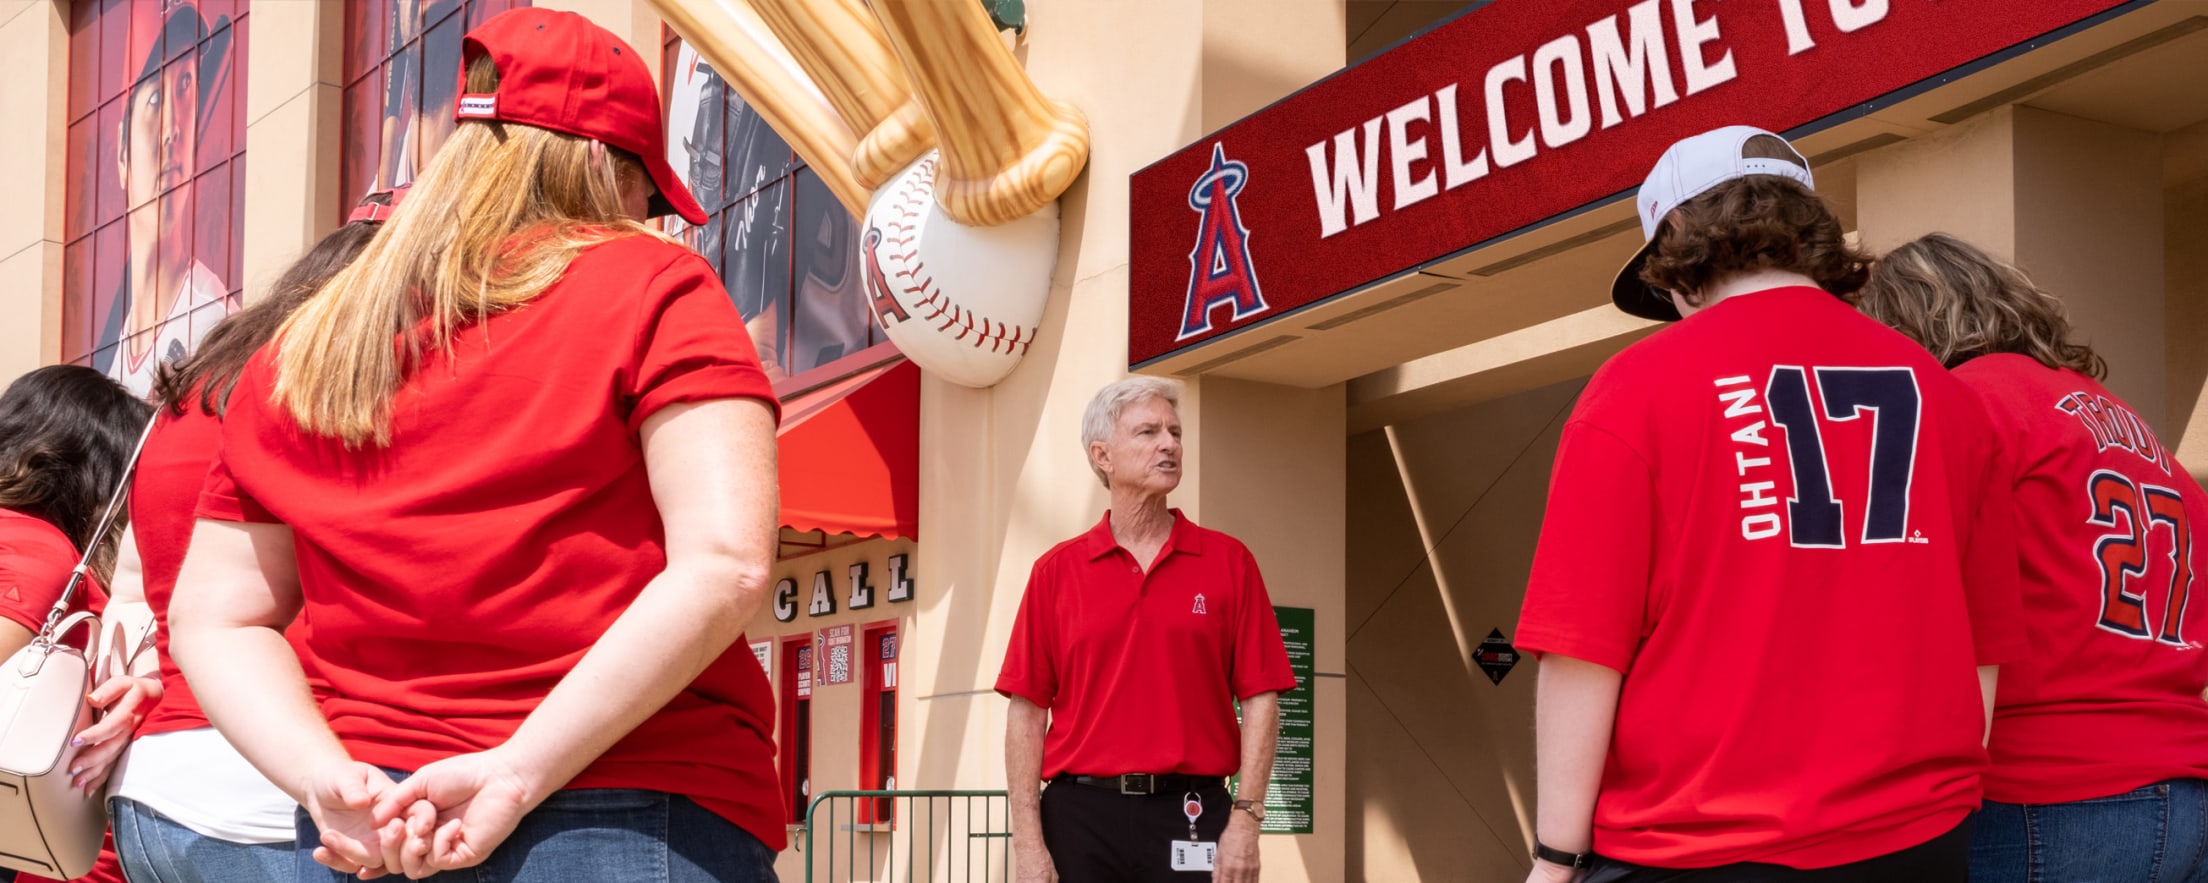 Your Guide to Angels Baseball in Anaheim